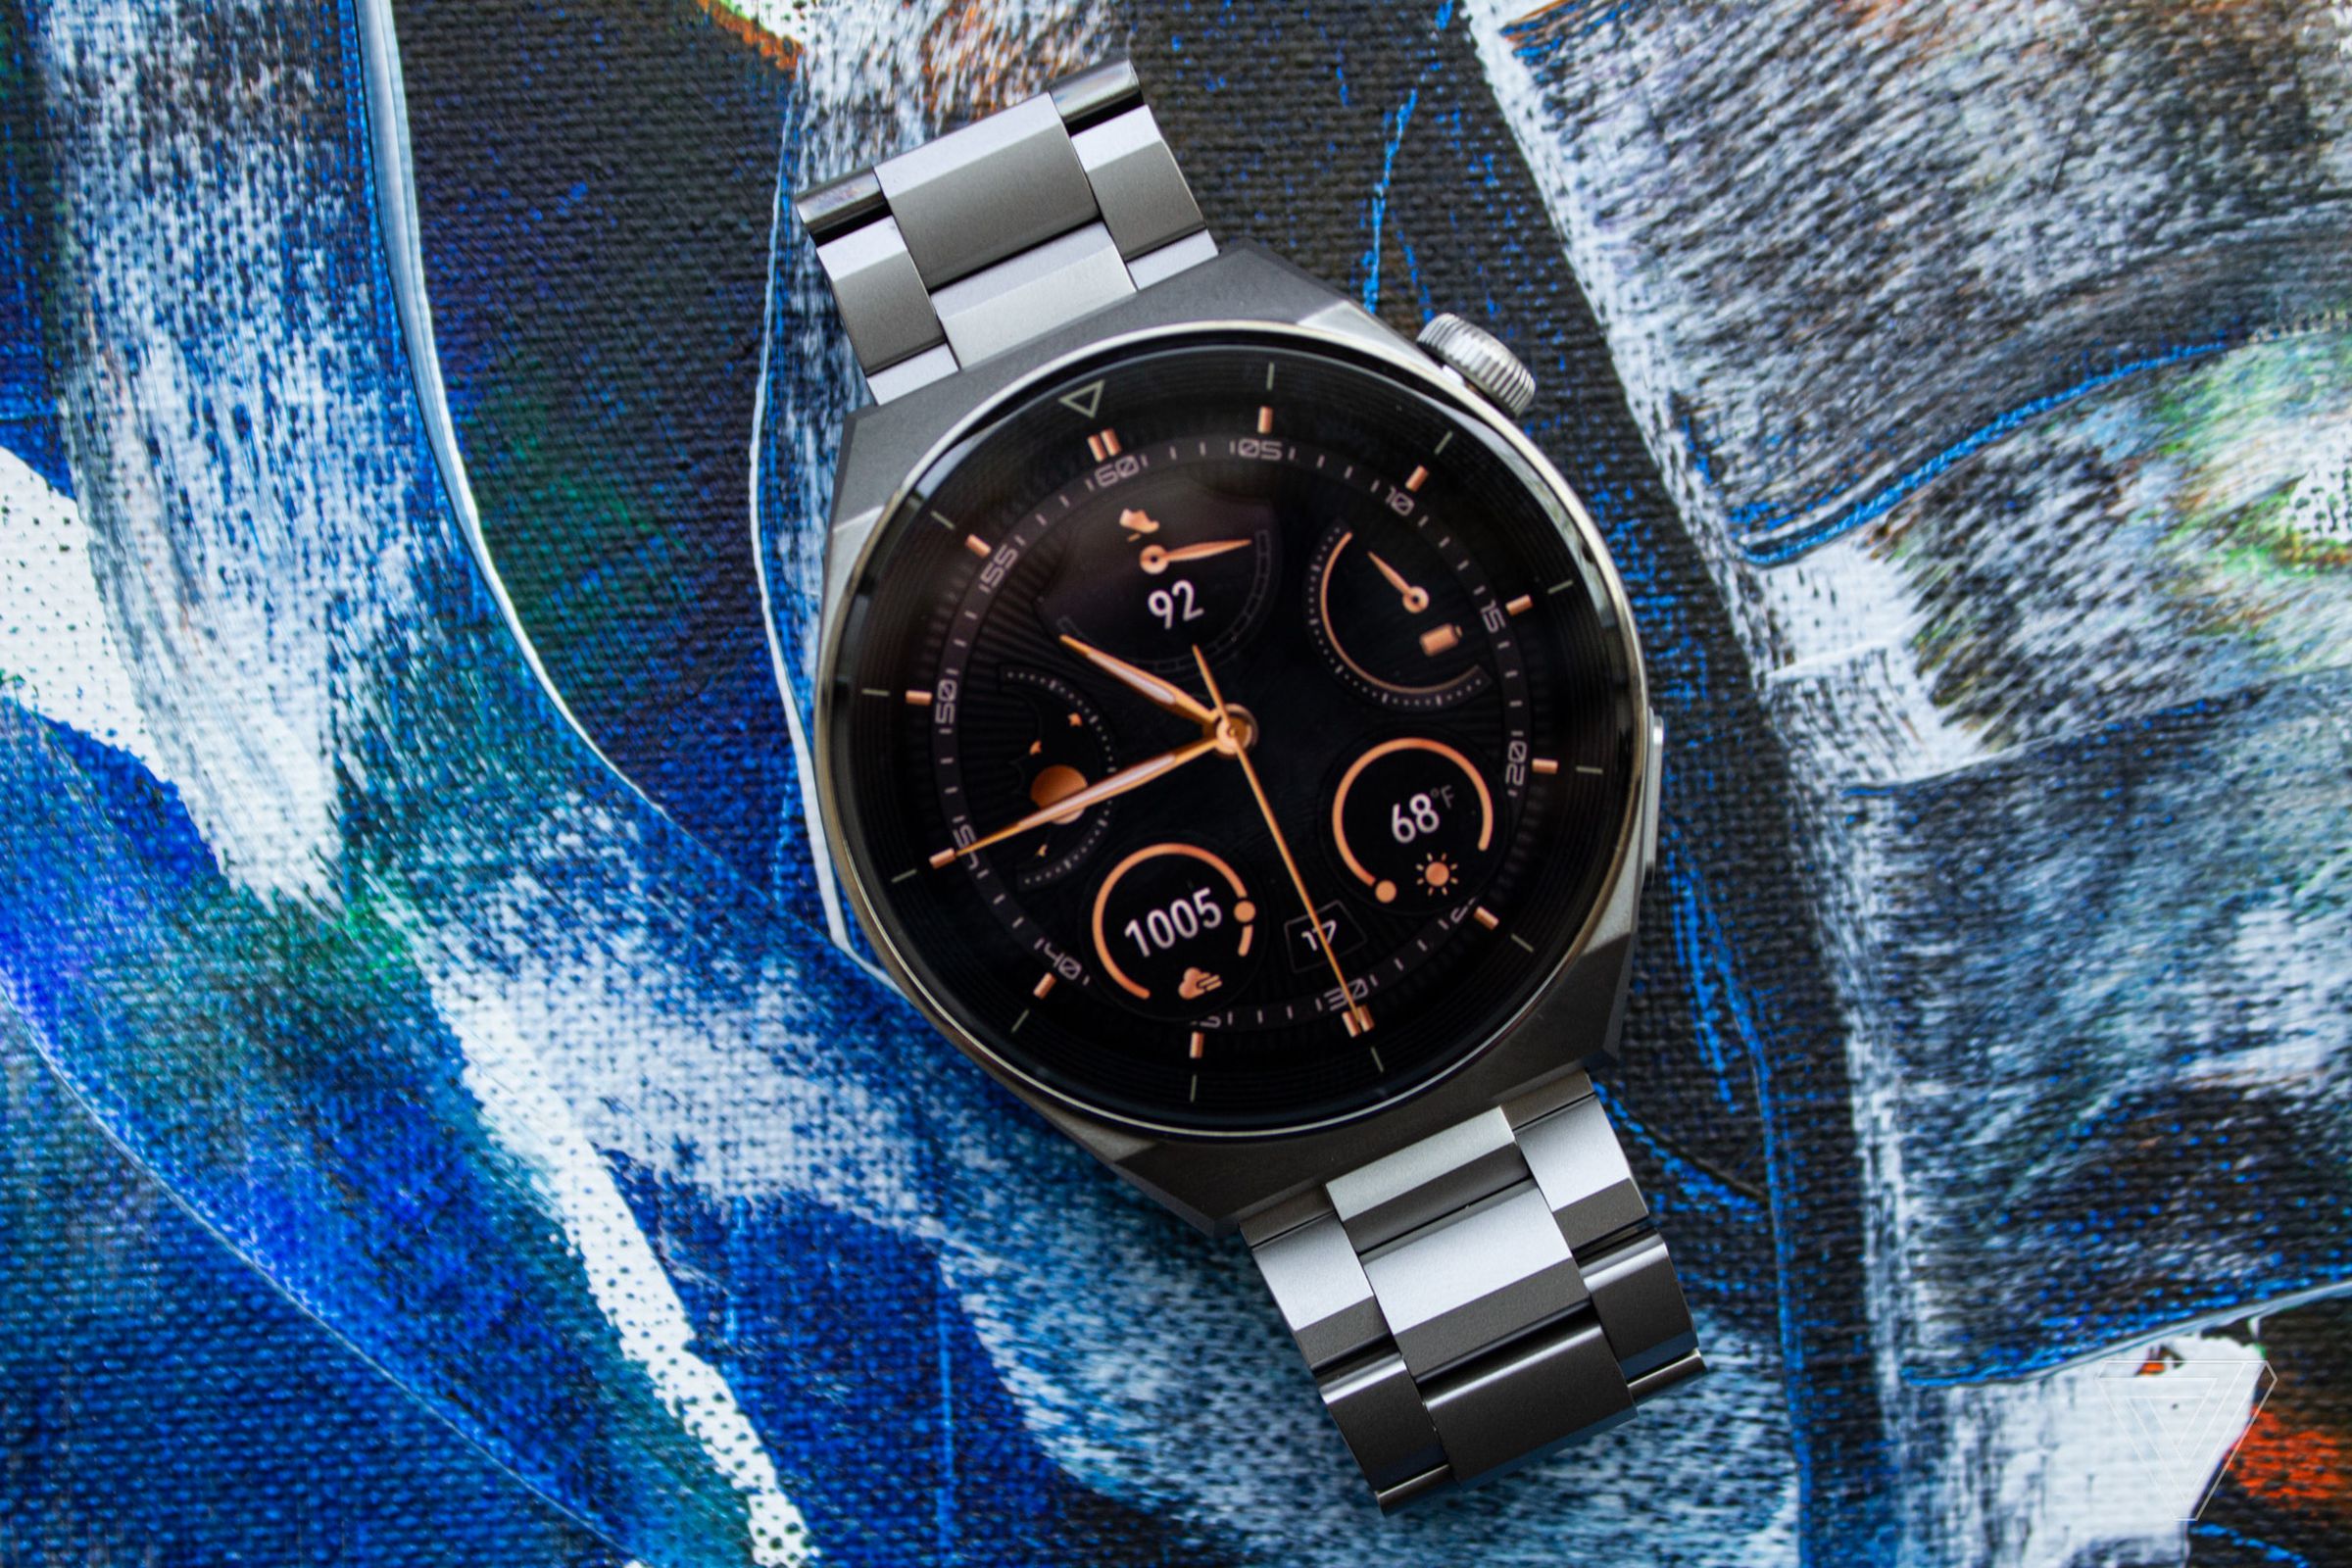 The Huawei Watch GT 3 Pro has a sophisticated design.